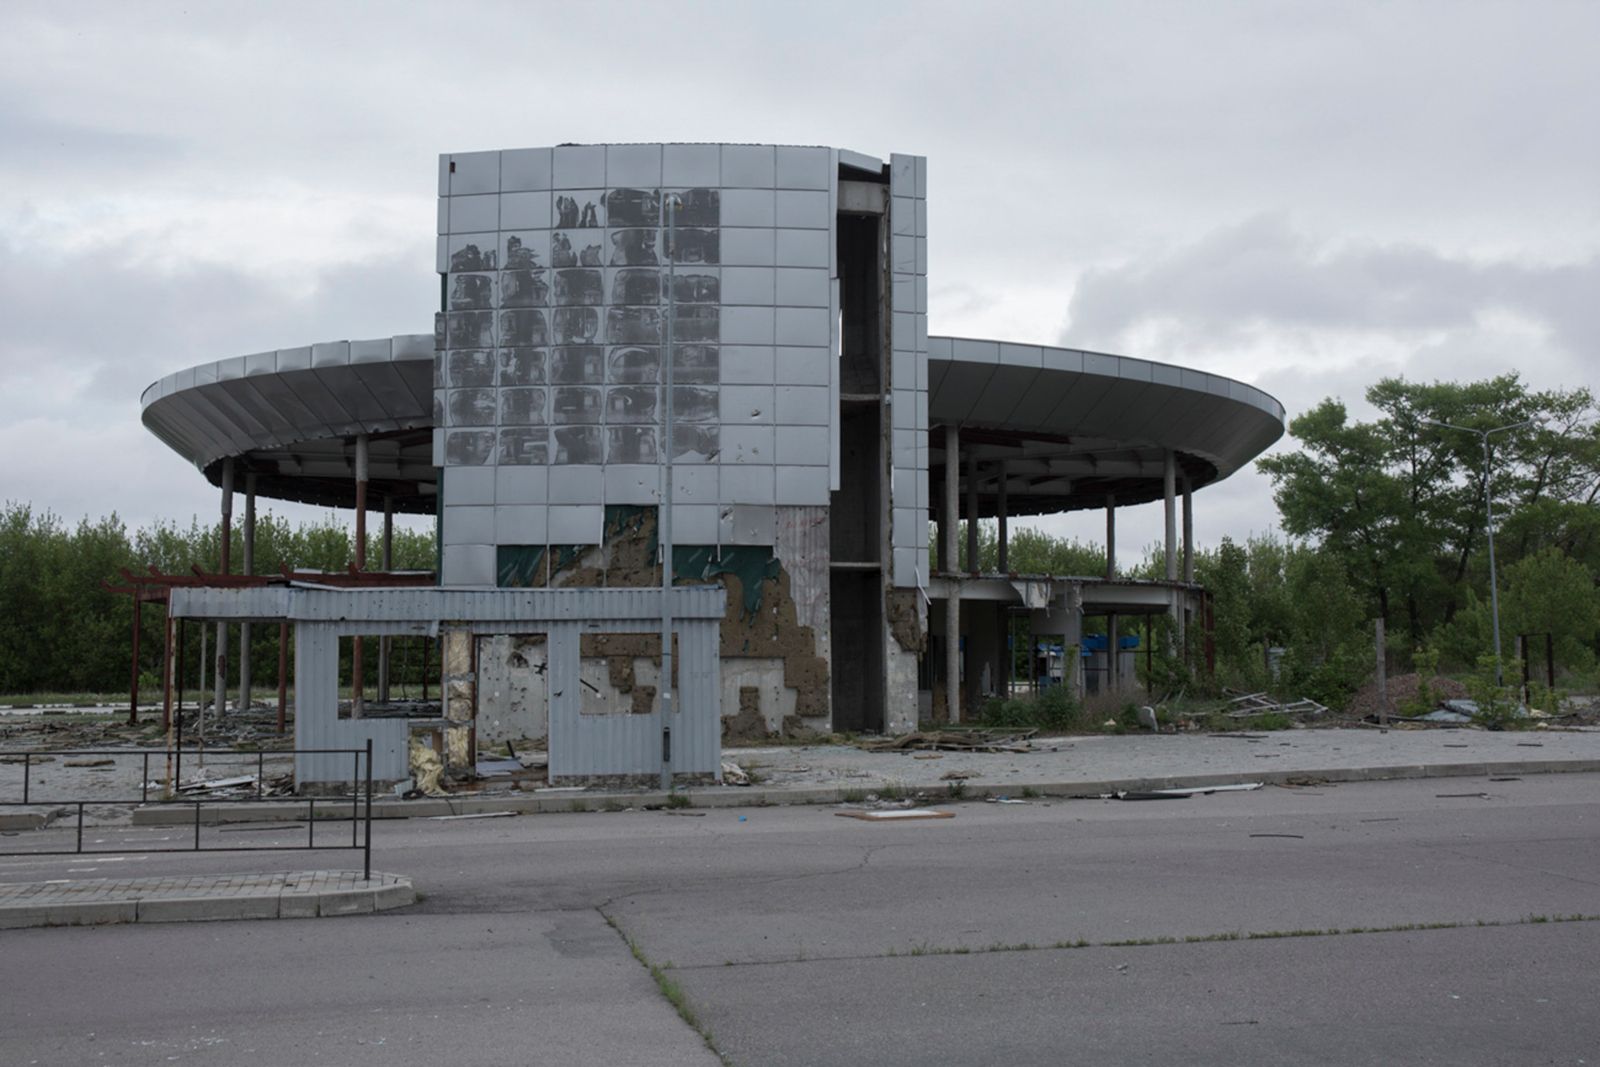 © Marek M Berezowski - Image from the Donbass. Aftermath. photography project